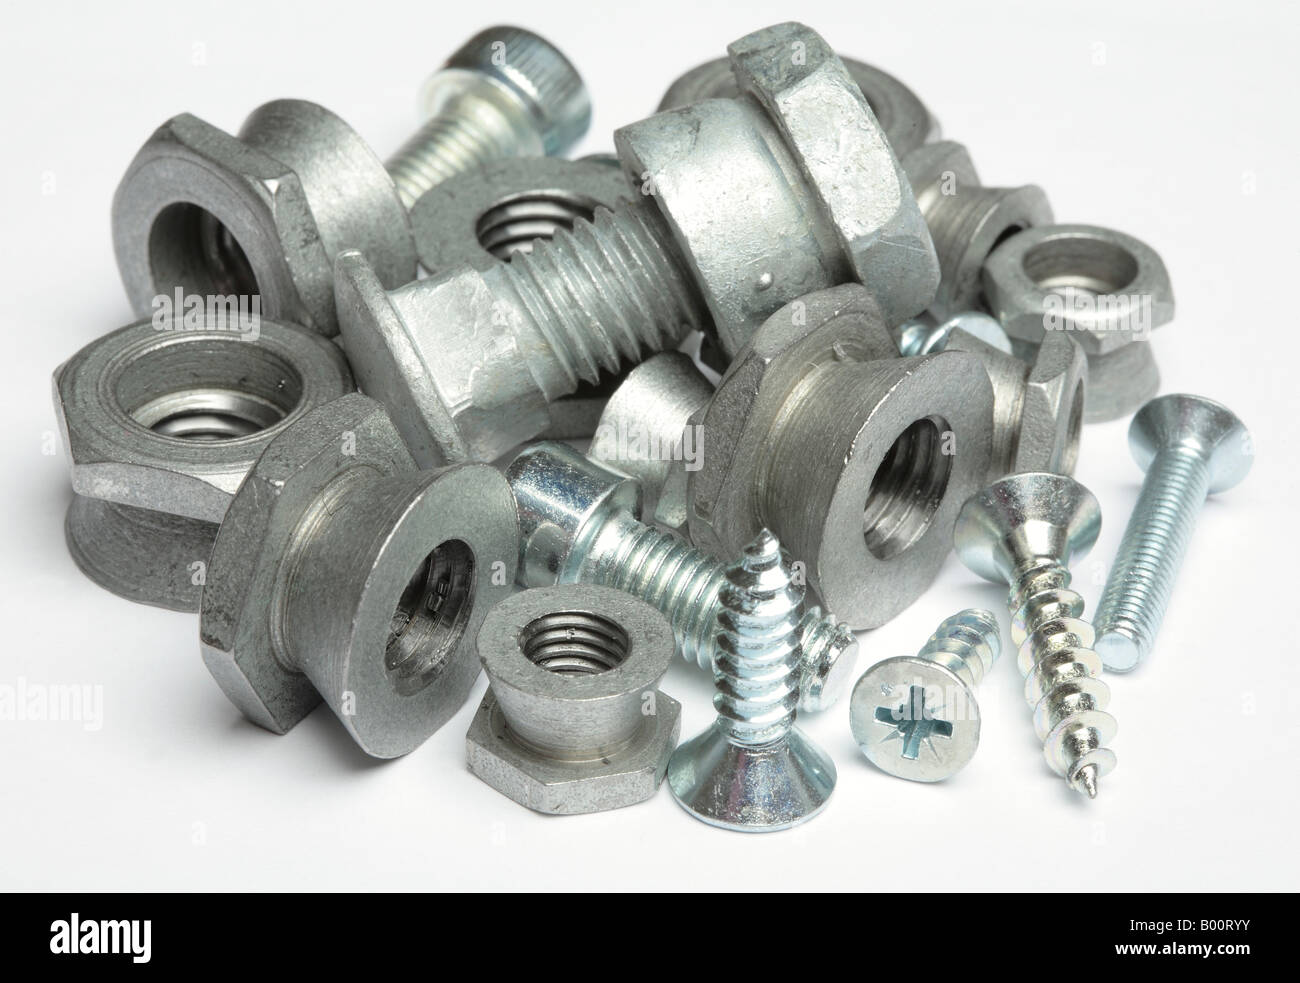 Assorted Screws, Nuts and Bolts. Stock Photo